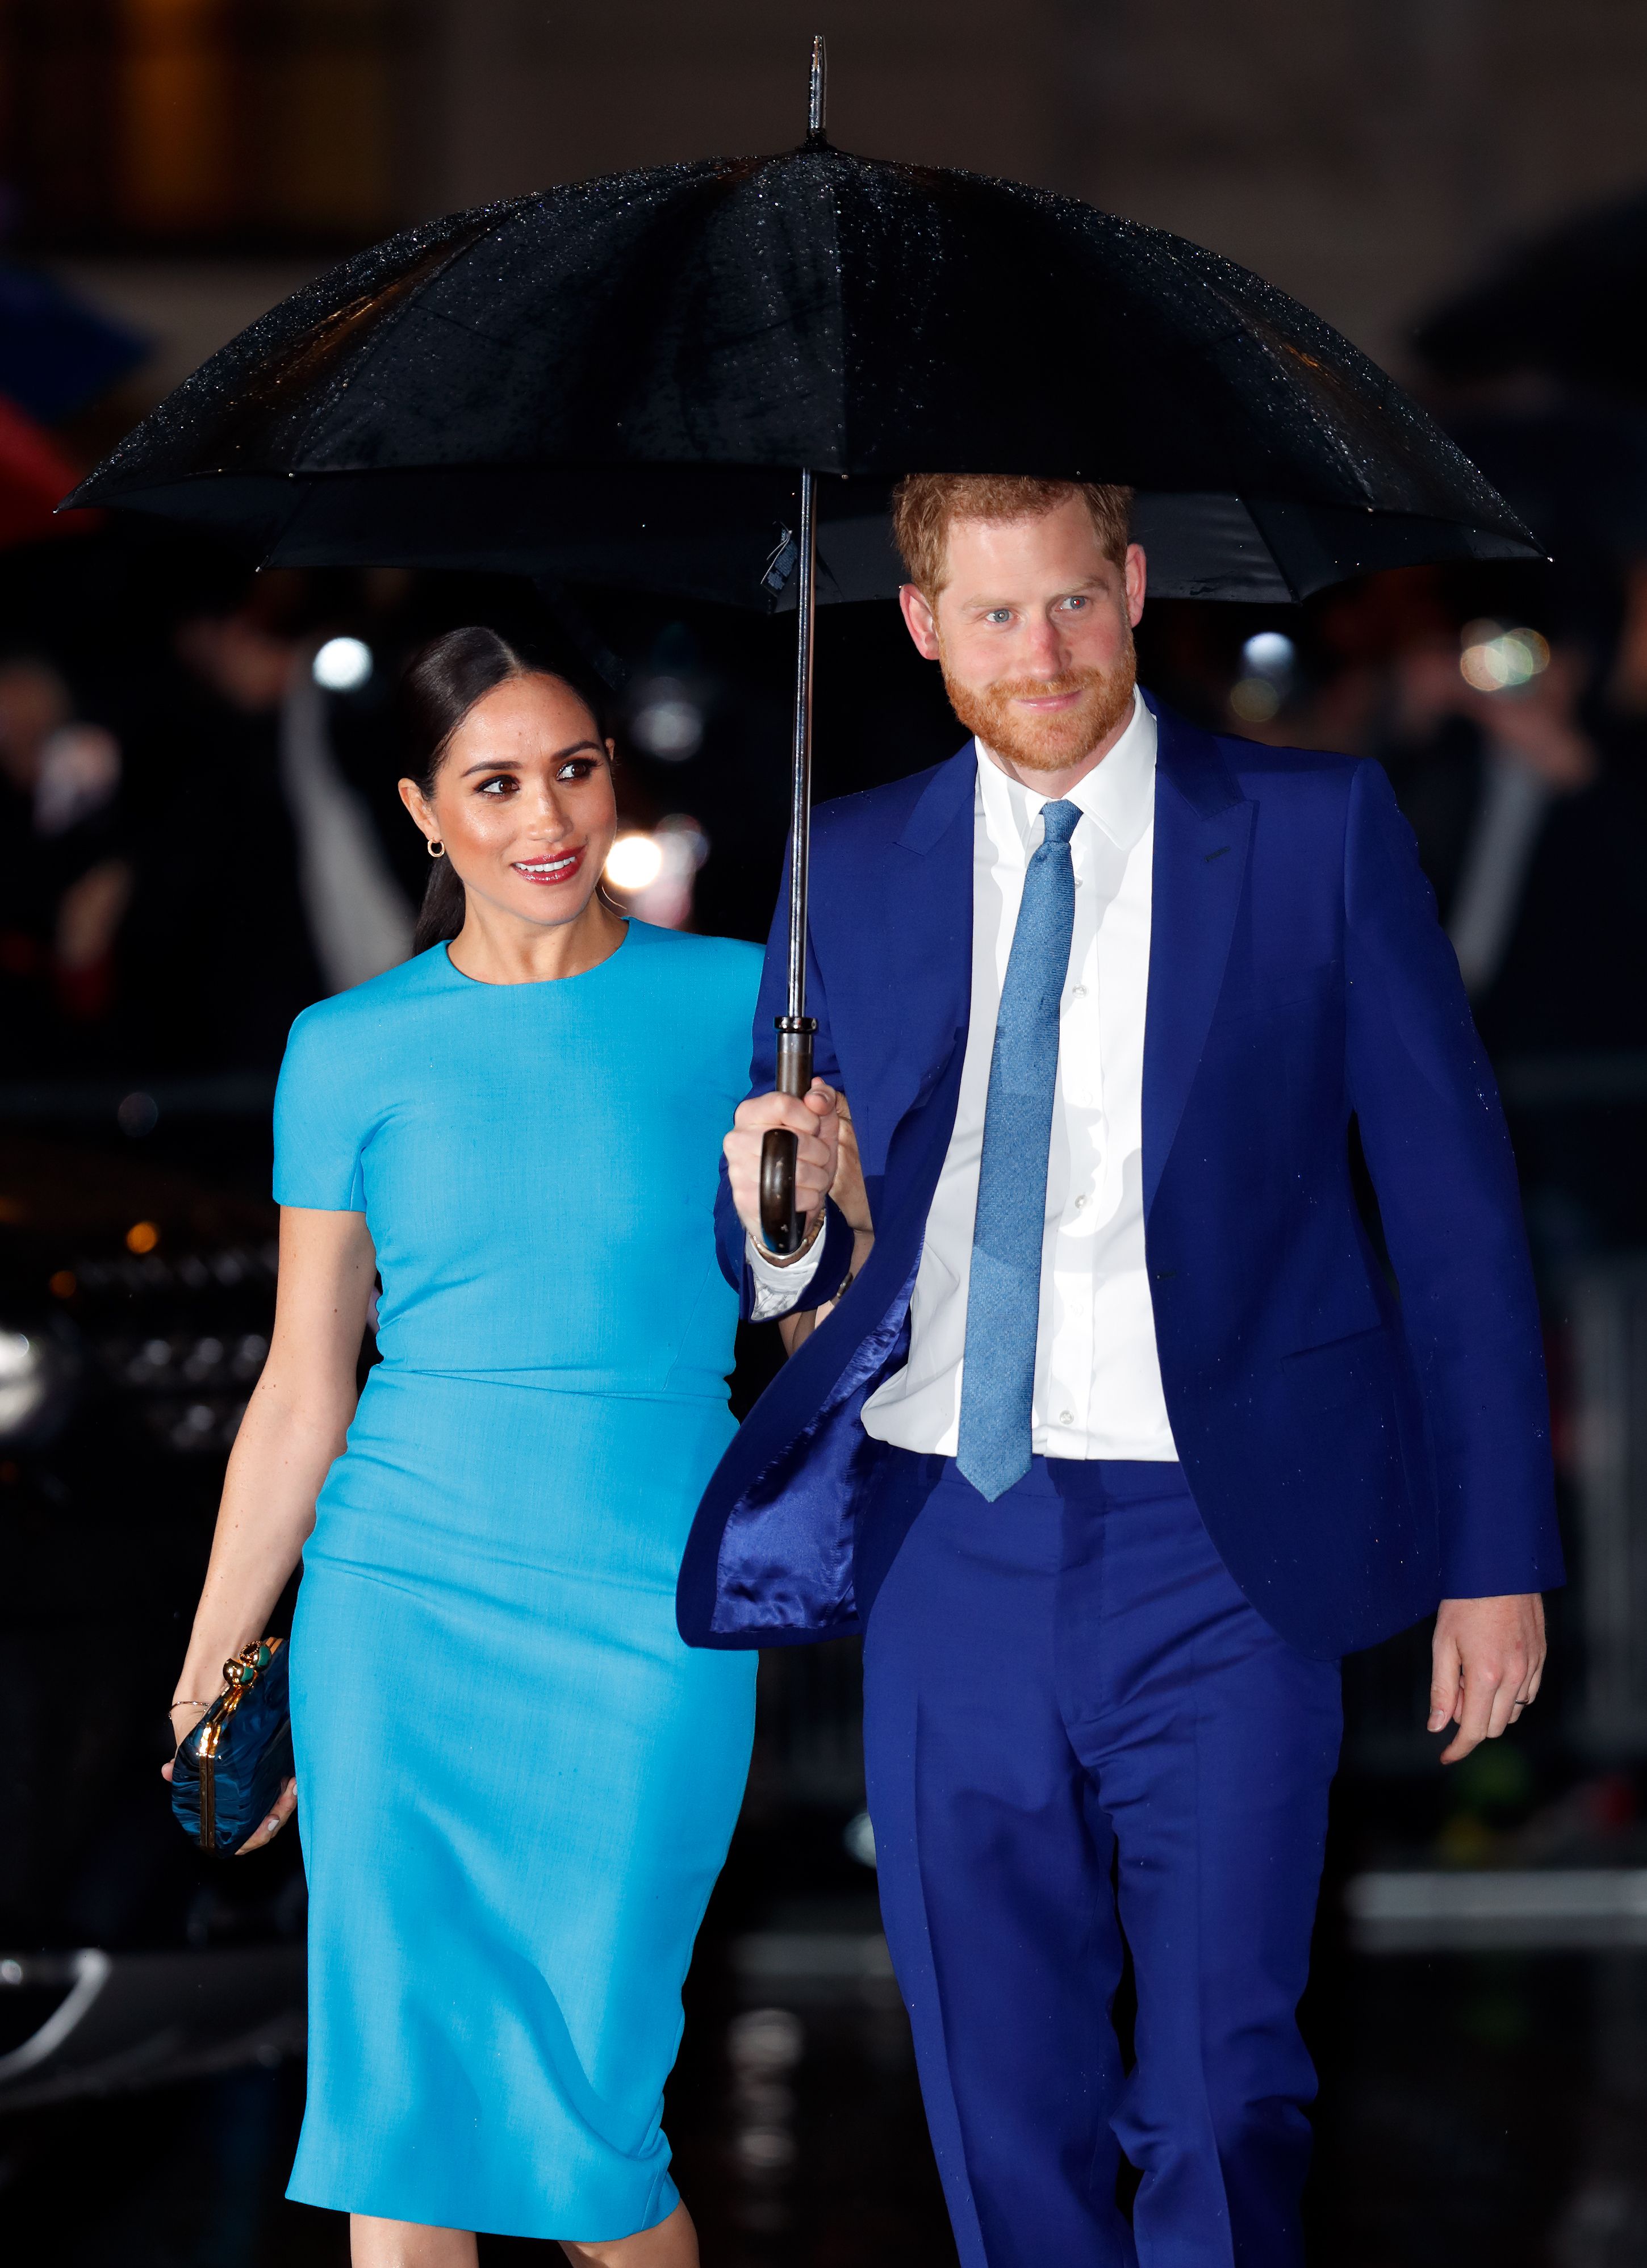 Duchess Meghan and Prince Harry at The Endeavour Fund Awards at Mansion House on March 5, 2020 | Photo: Getty Images